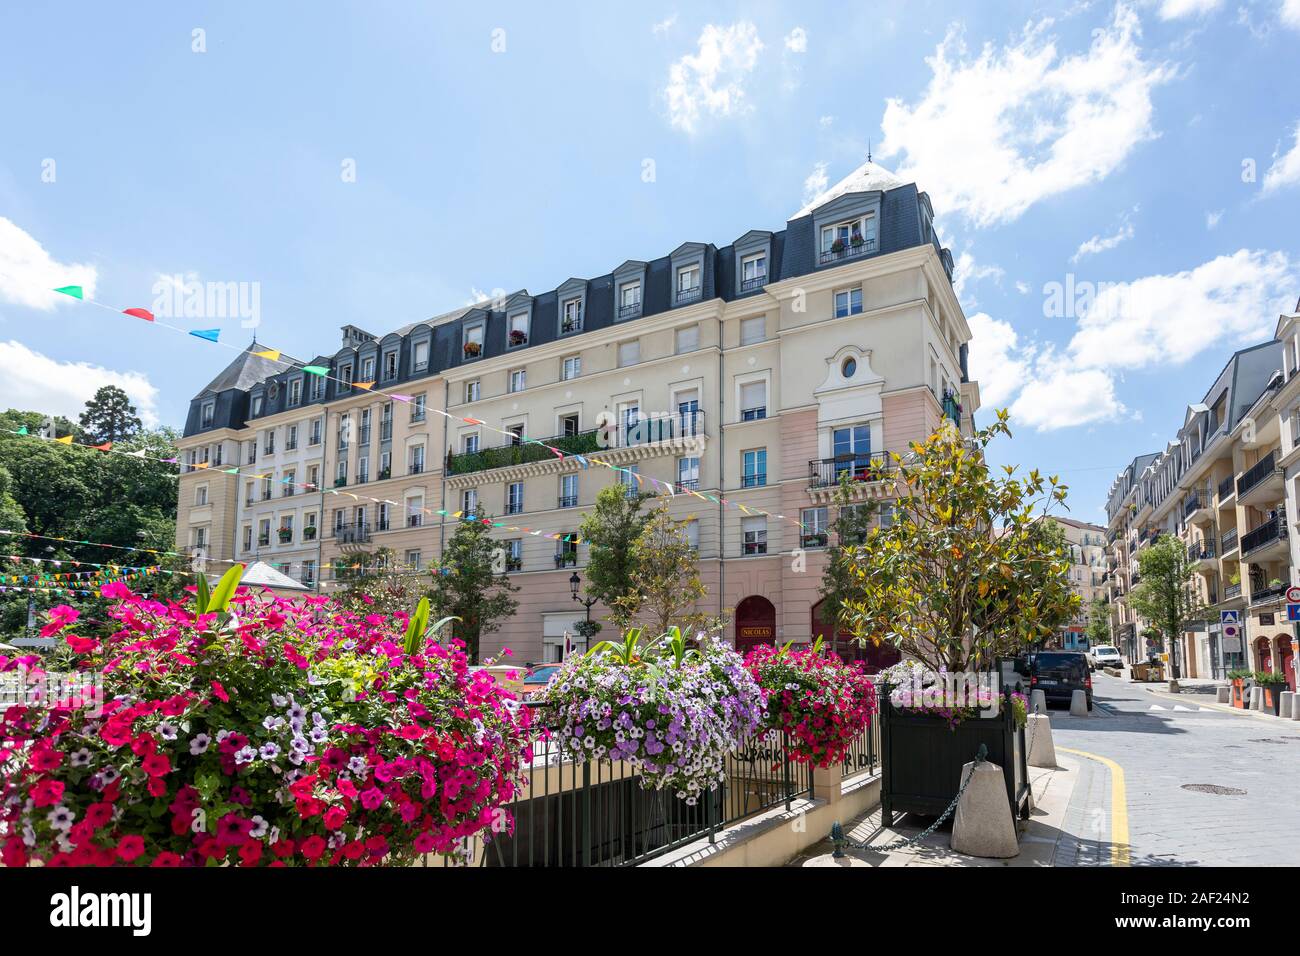 Le Plessis-Robinson (Paris area): real estate in the Grand Place square, in the district of Coeur de ville. Stock Photo